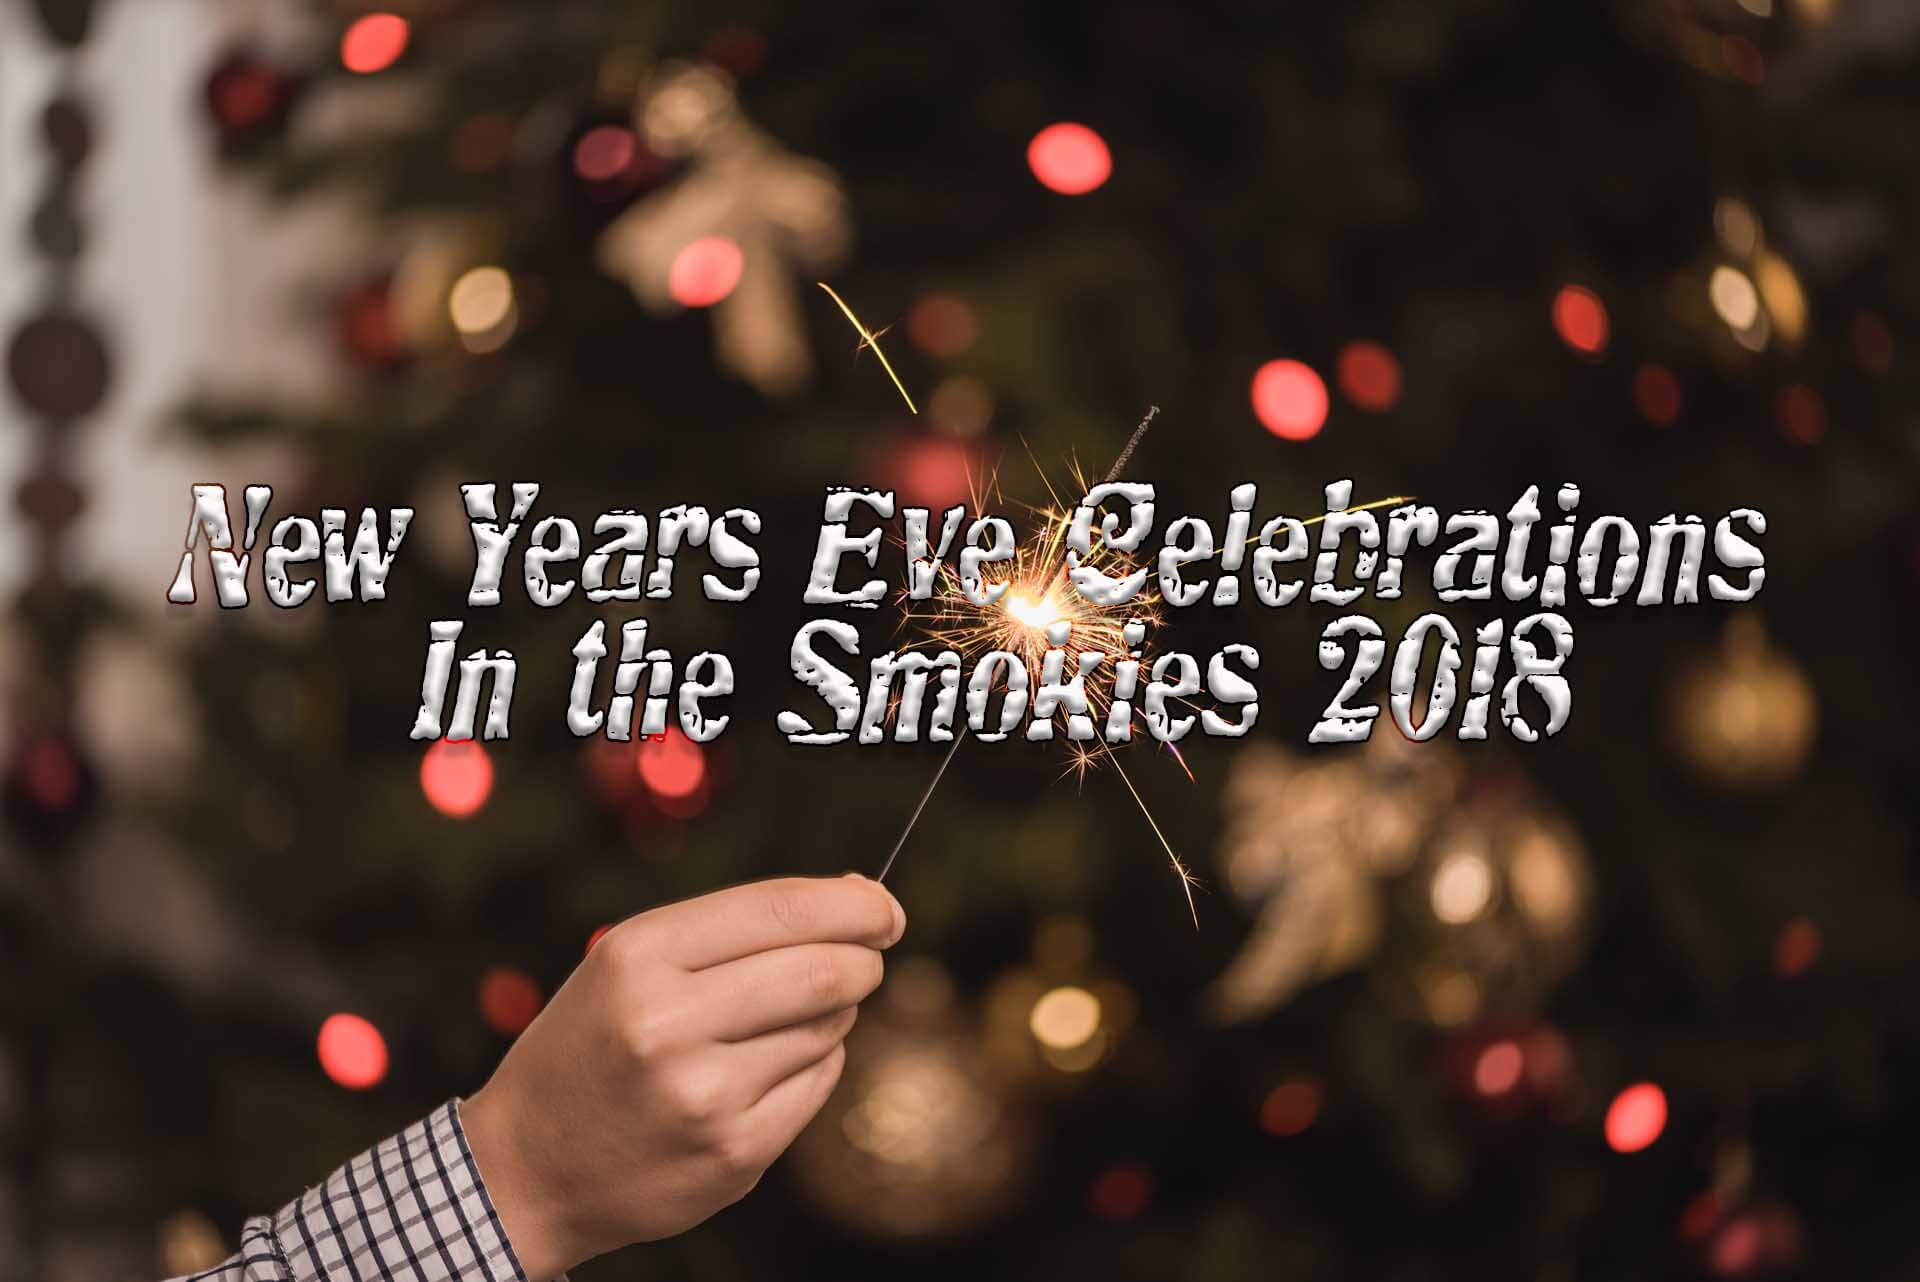 New Years Eve Celebrations In the Smokies